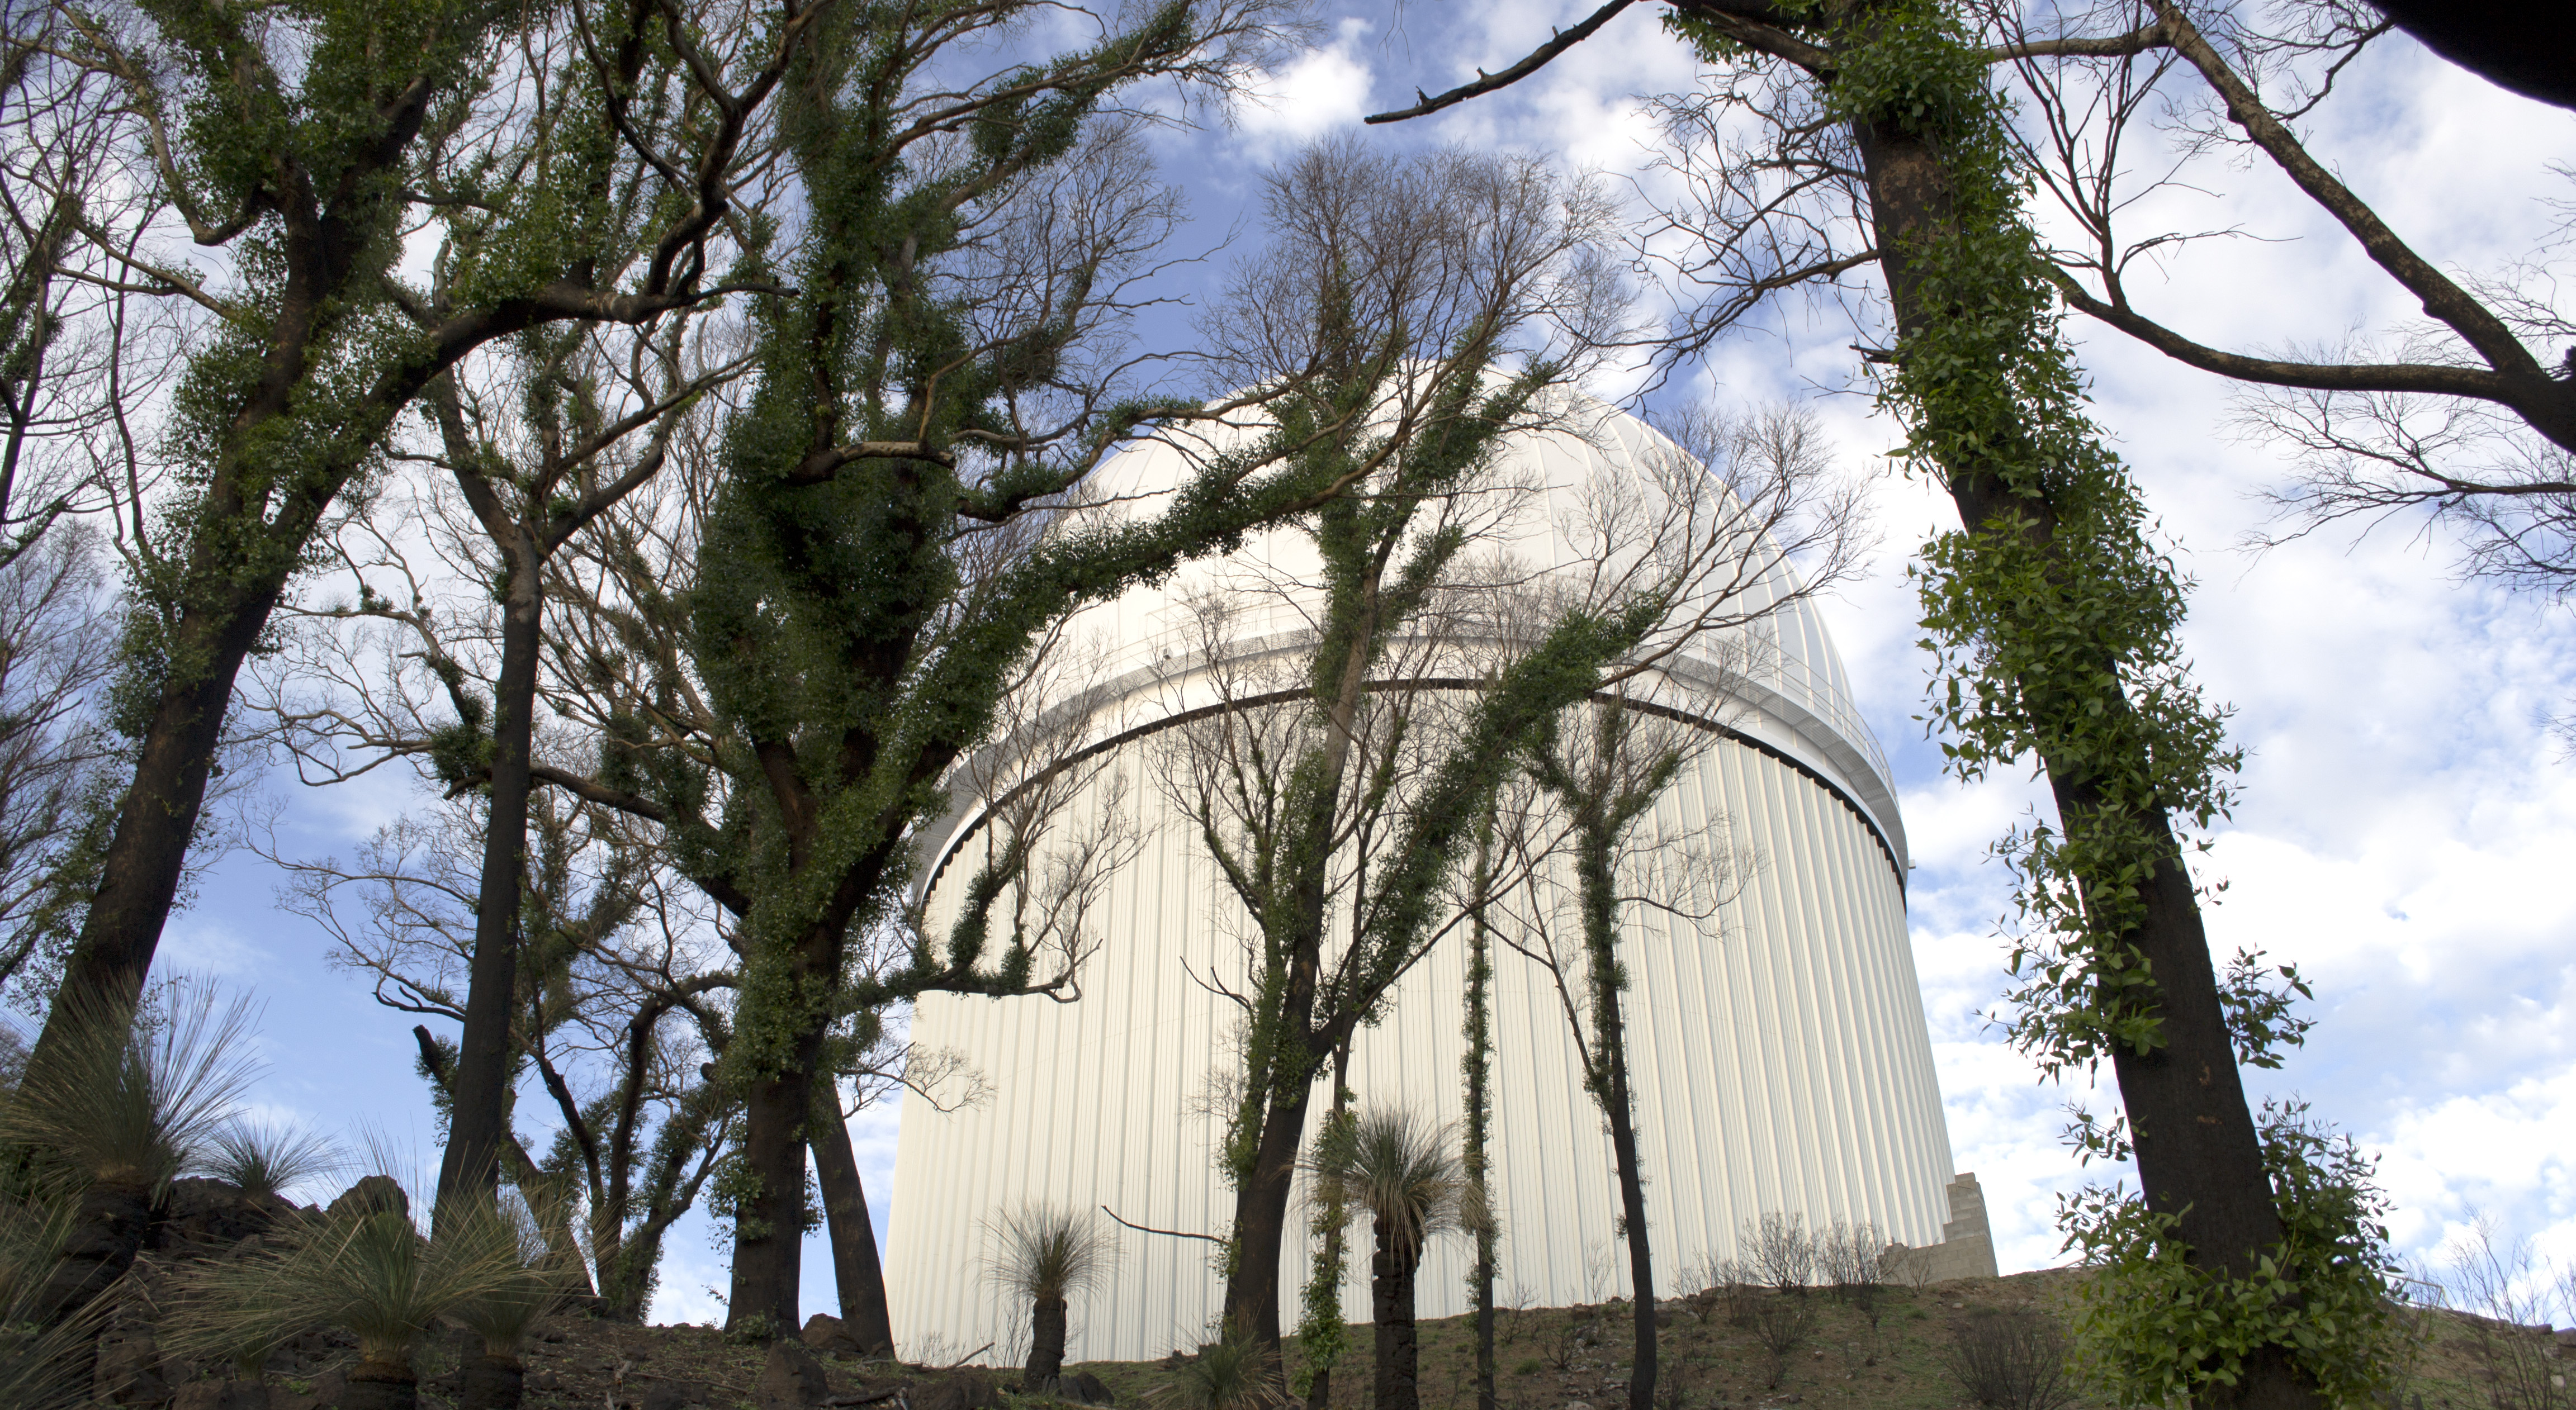 Trees sprouting with new leaves in front of the Anglo-Australian Telescope at Siding Spring Observatory